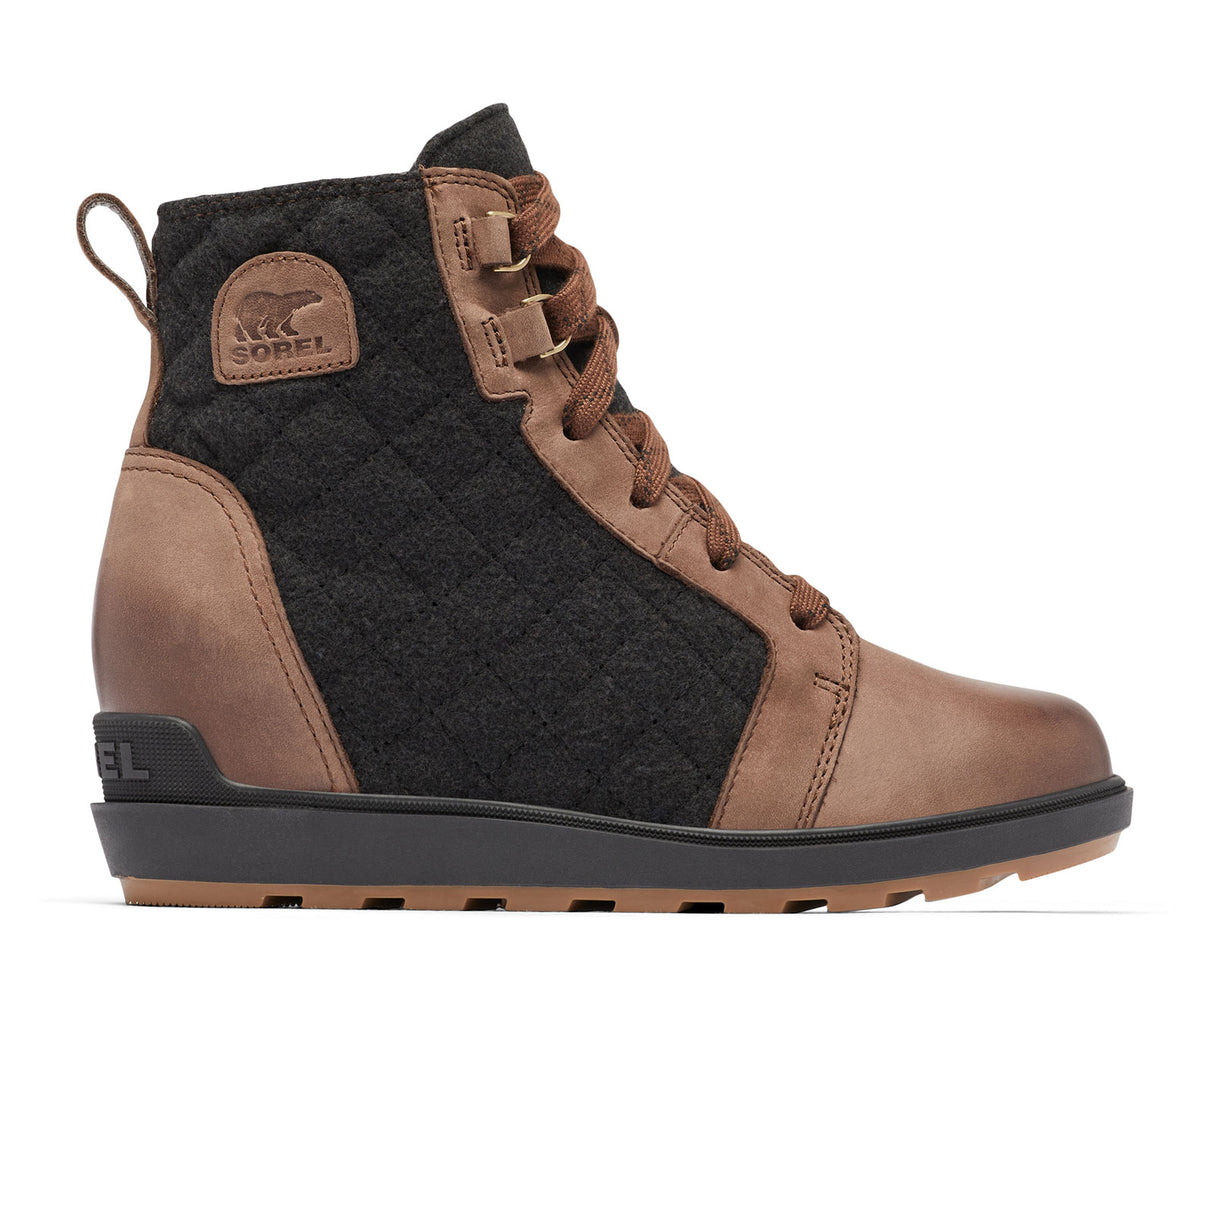 Sorel Evie II NW Lace Wedge Ankle Boot (Women) - Tobacco/Black Boots - Fashion - Wedge - The Heel Shoe Fitters